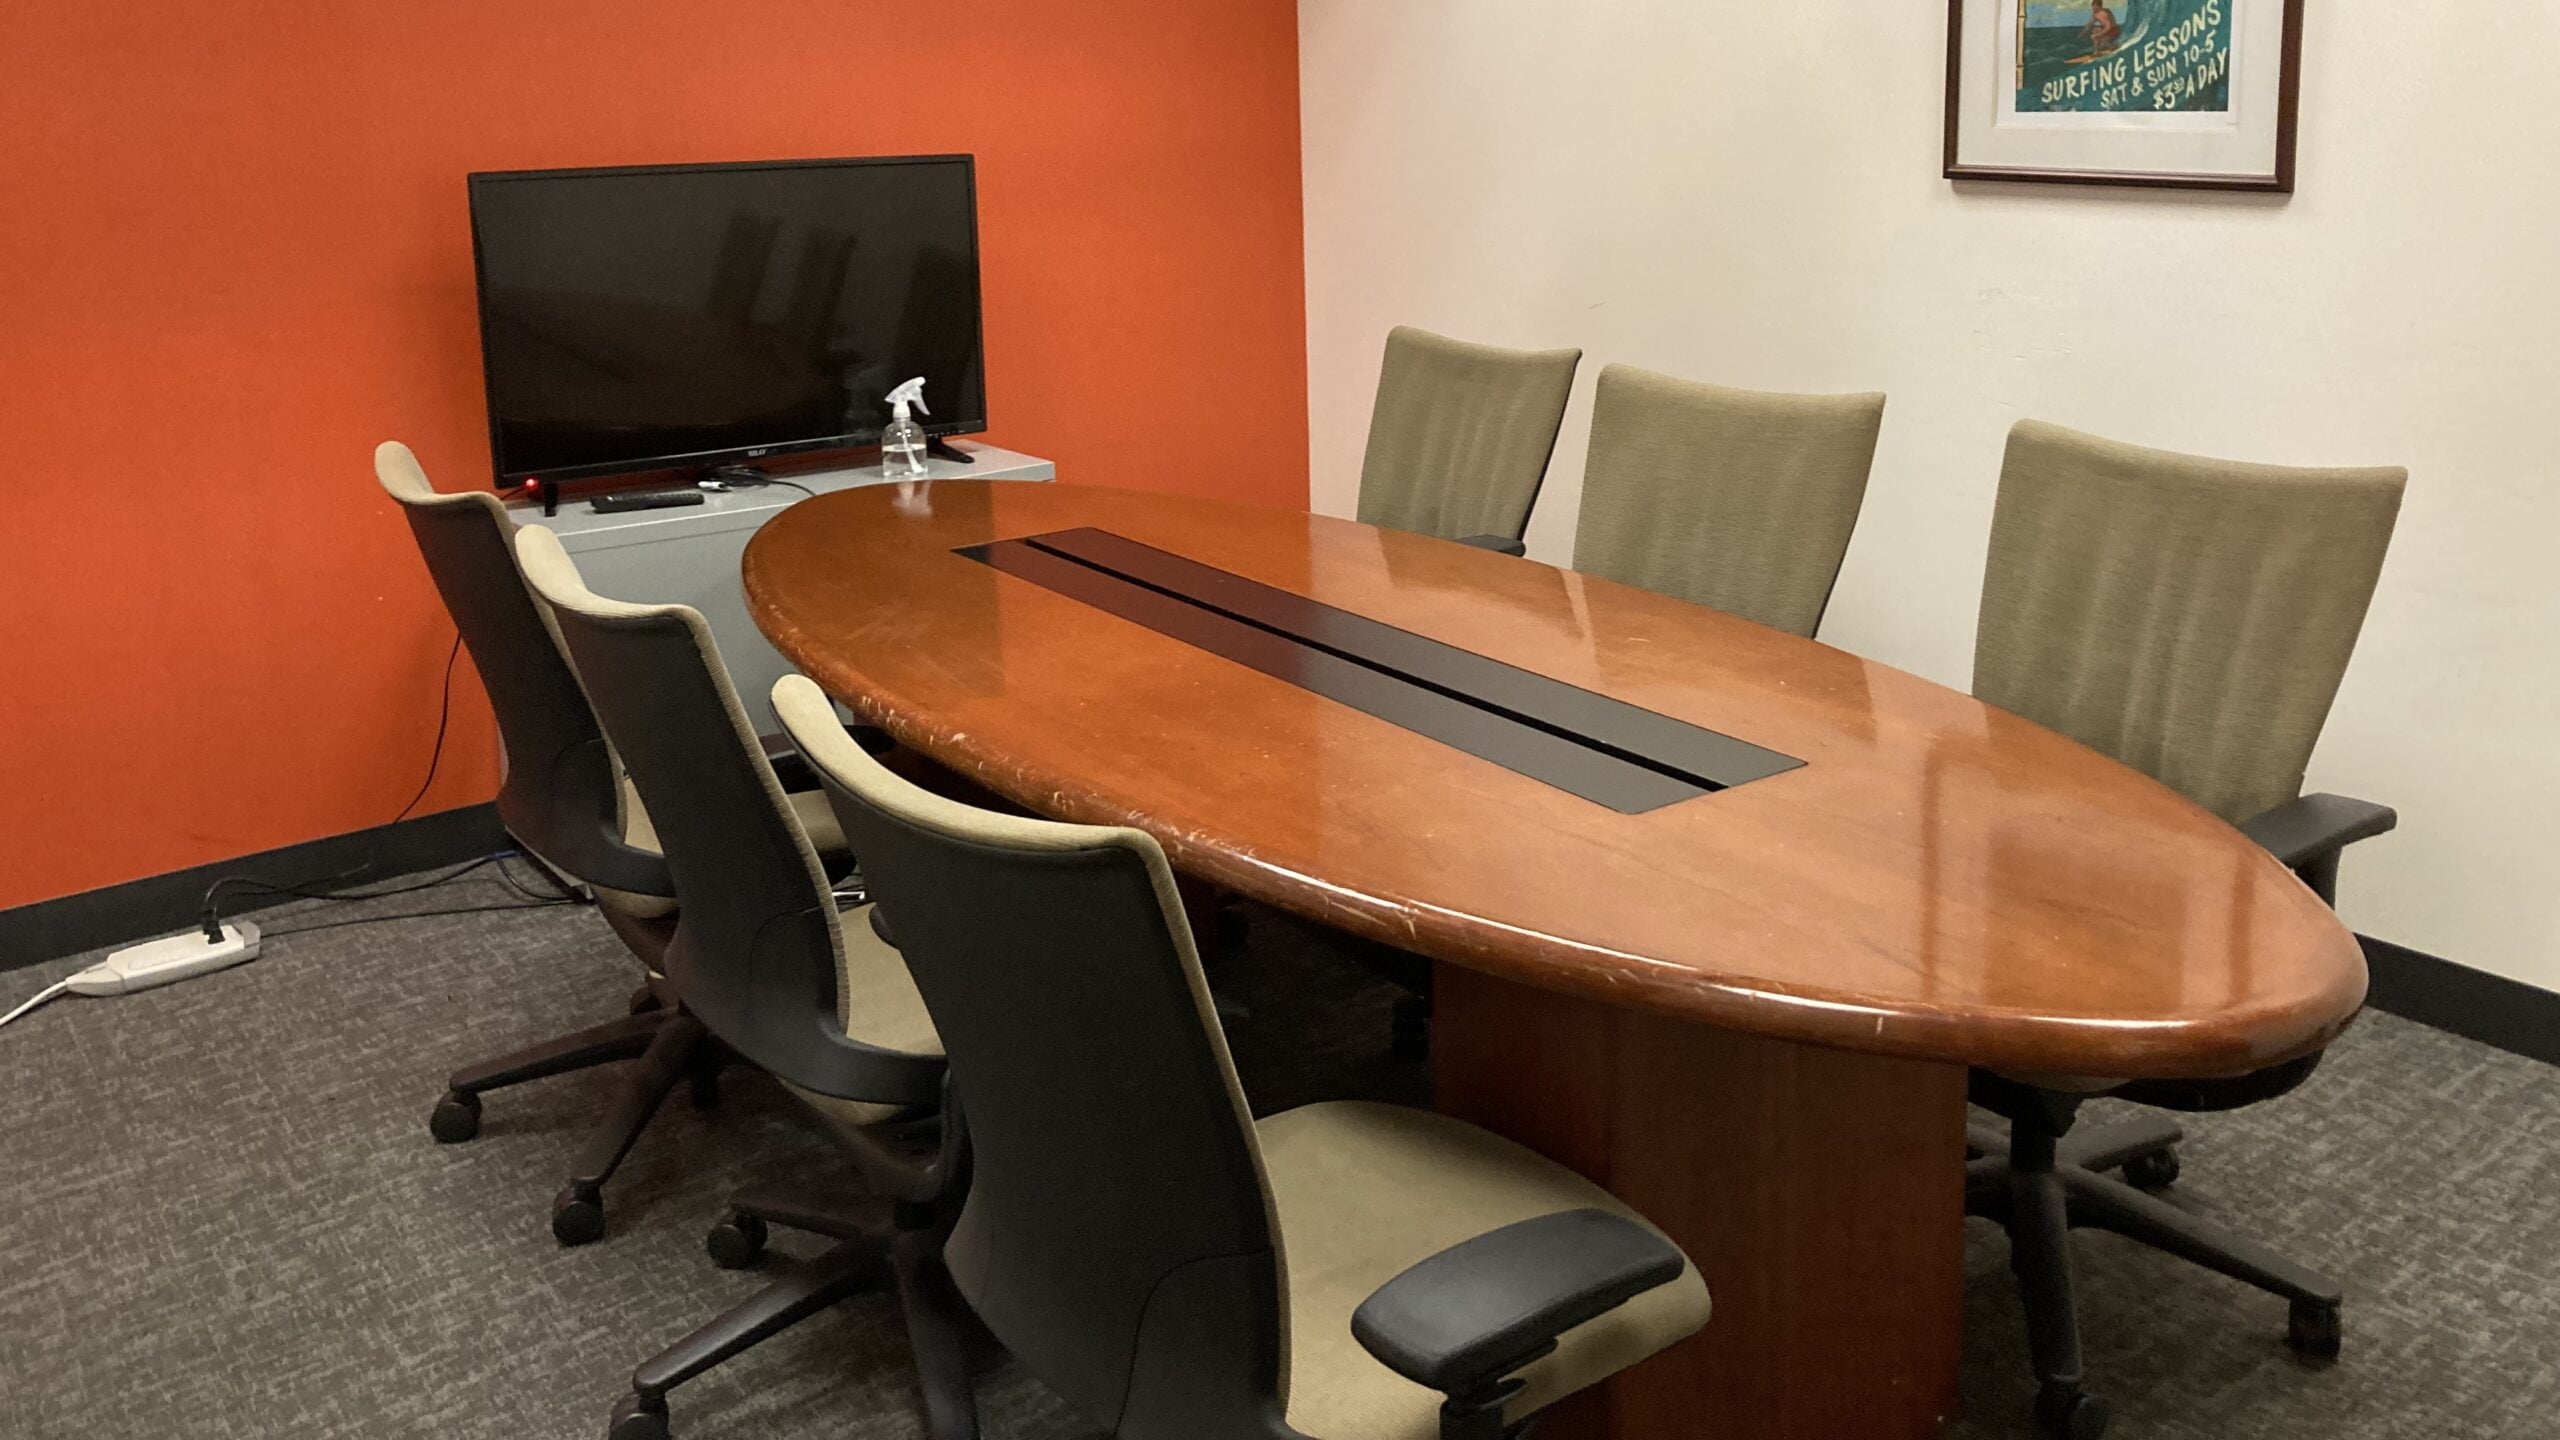 Big Island professional conference room for rent by the hour at SURF Incubator in Downtown Seattle Washington